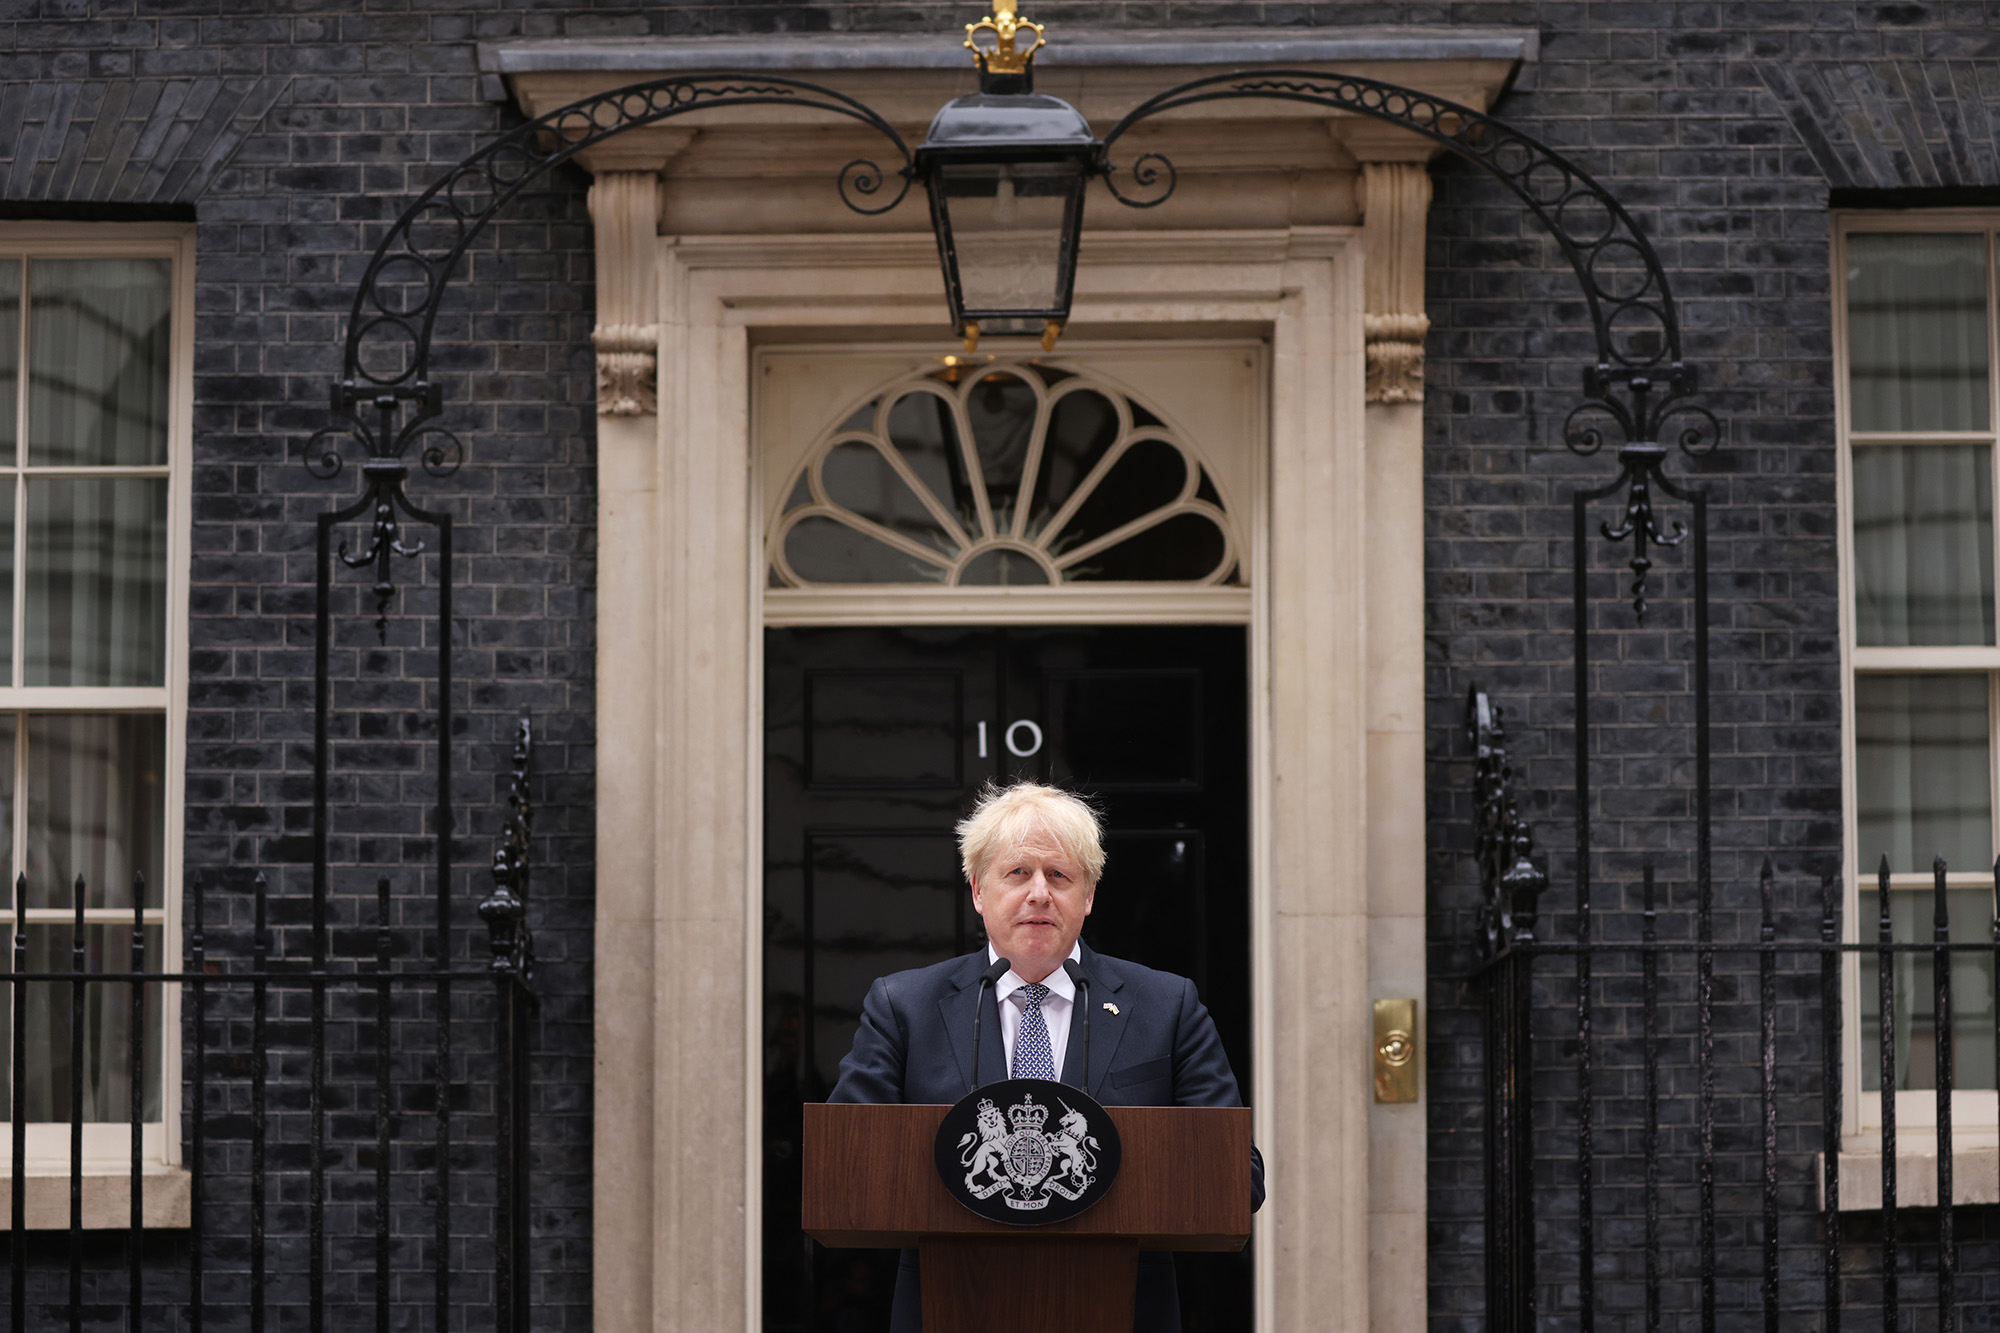 Prime Minister Boris Johnson addresses the nation as he announces his resignation outside 10 Downing Street, on July 7, in London, England.